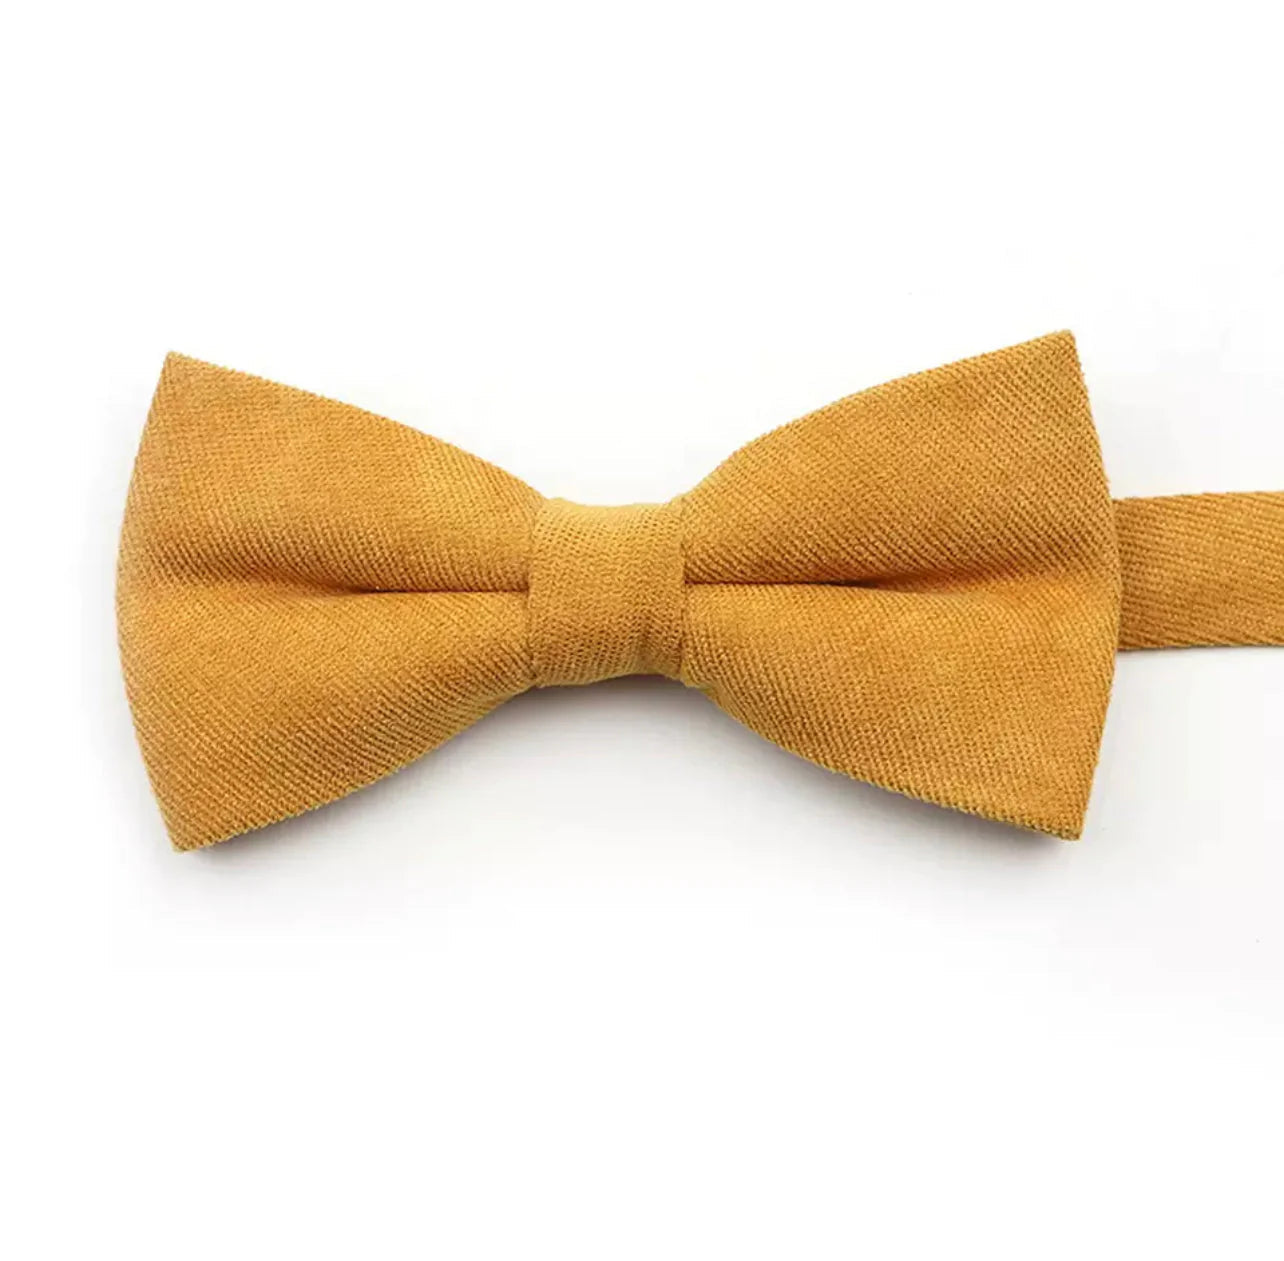 ELLE Mustard Yellow Bow Tie (Pretied)-Mustard Yellow Bow Tie (Pretied) for AdultsStrap is Adjustable - 32CM Long (10-18 Inches)Pre-Tied bowtieBow Tie 12CM * 6CMMade from Cotton Great for Weddings Events Family Shoots Styled Shoots Wedding Photography Walking in weddings Mens Bow Tie great for weddings and events. Great for the Groom and Groomsmen to wear at the wedding. Serves as a great gift idea; for anniversaries or wedding presents. Looks great in styled shoots and wedding photography. bow t